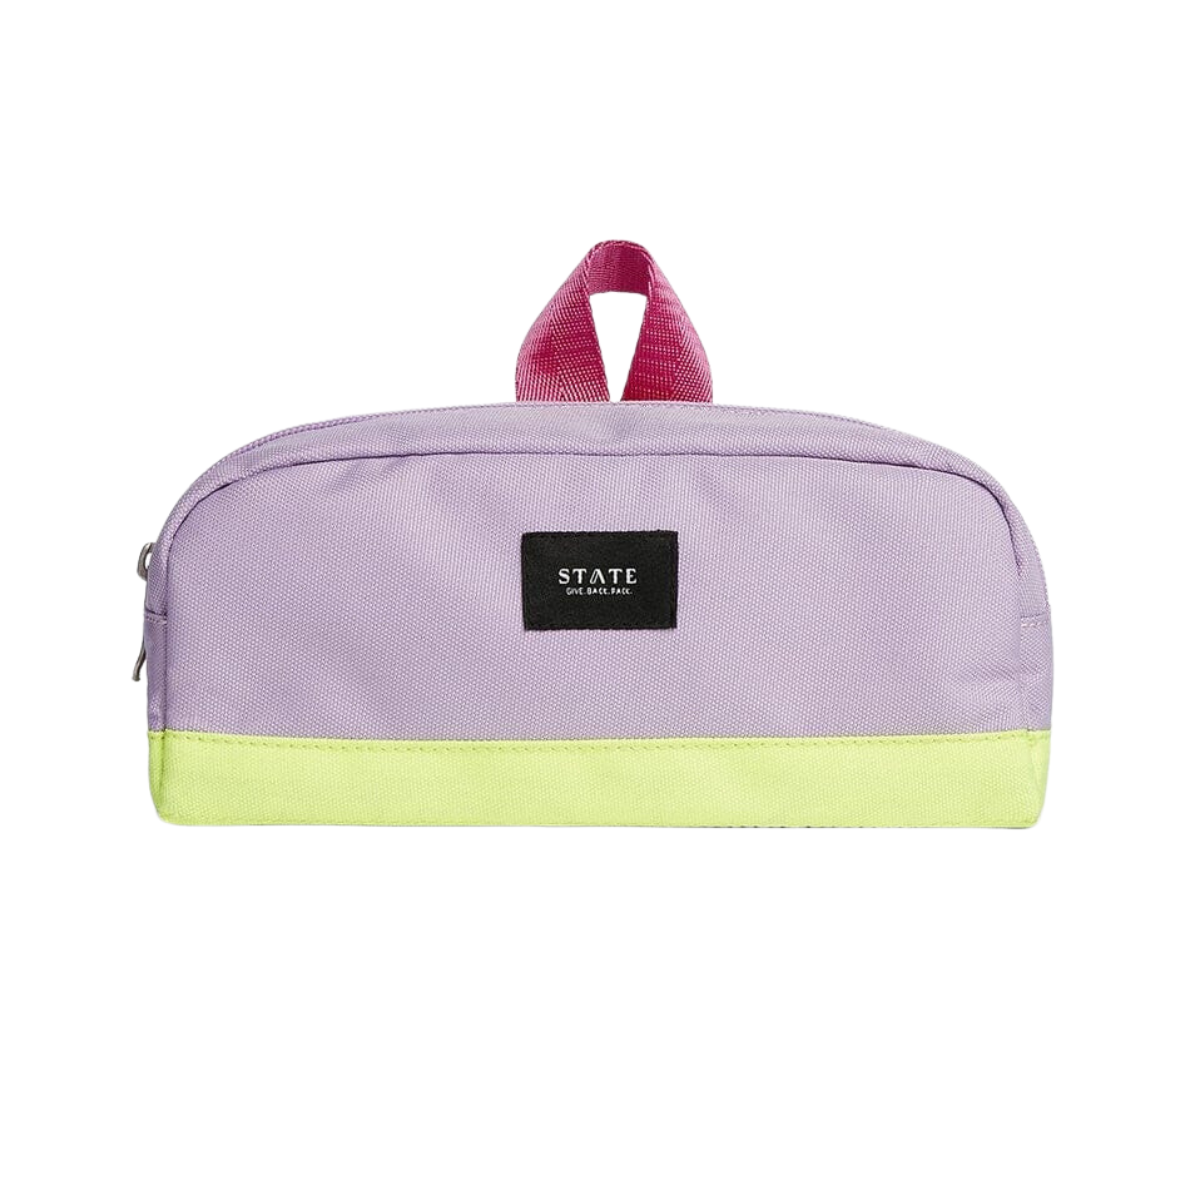 Clinton Pencil Case in Pink & Lemon by State